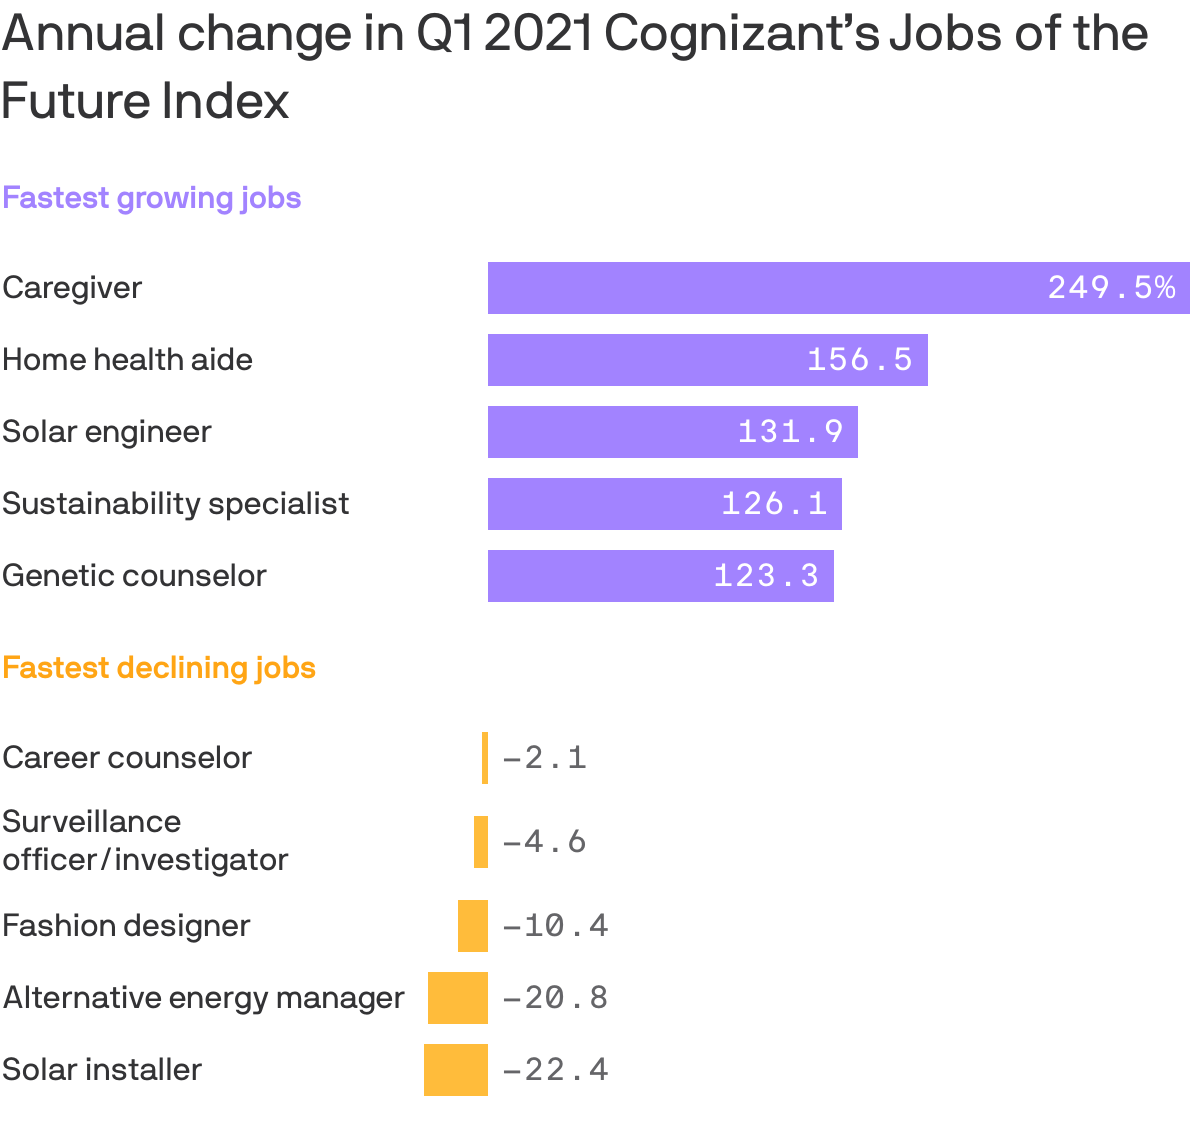 Annual change in Q1 2021 Cognizant’s Jobs of the Future Index